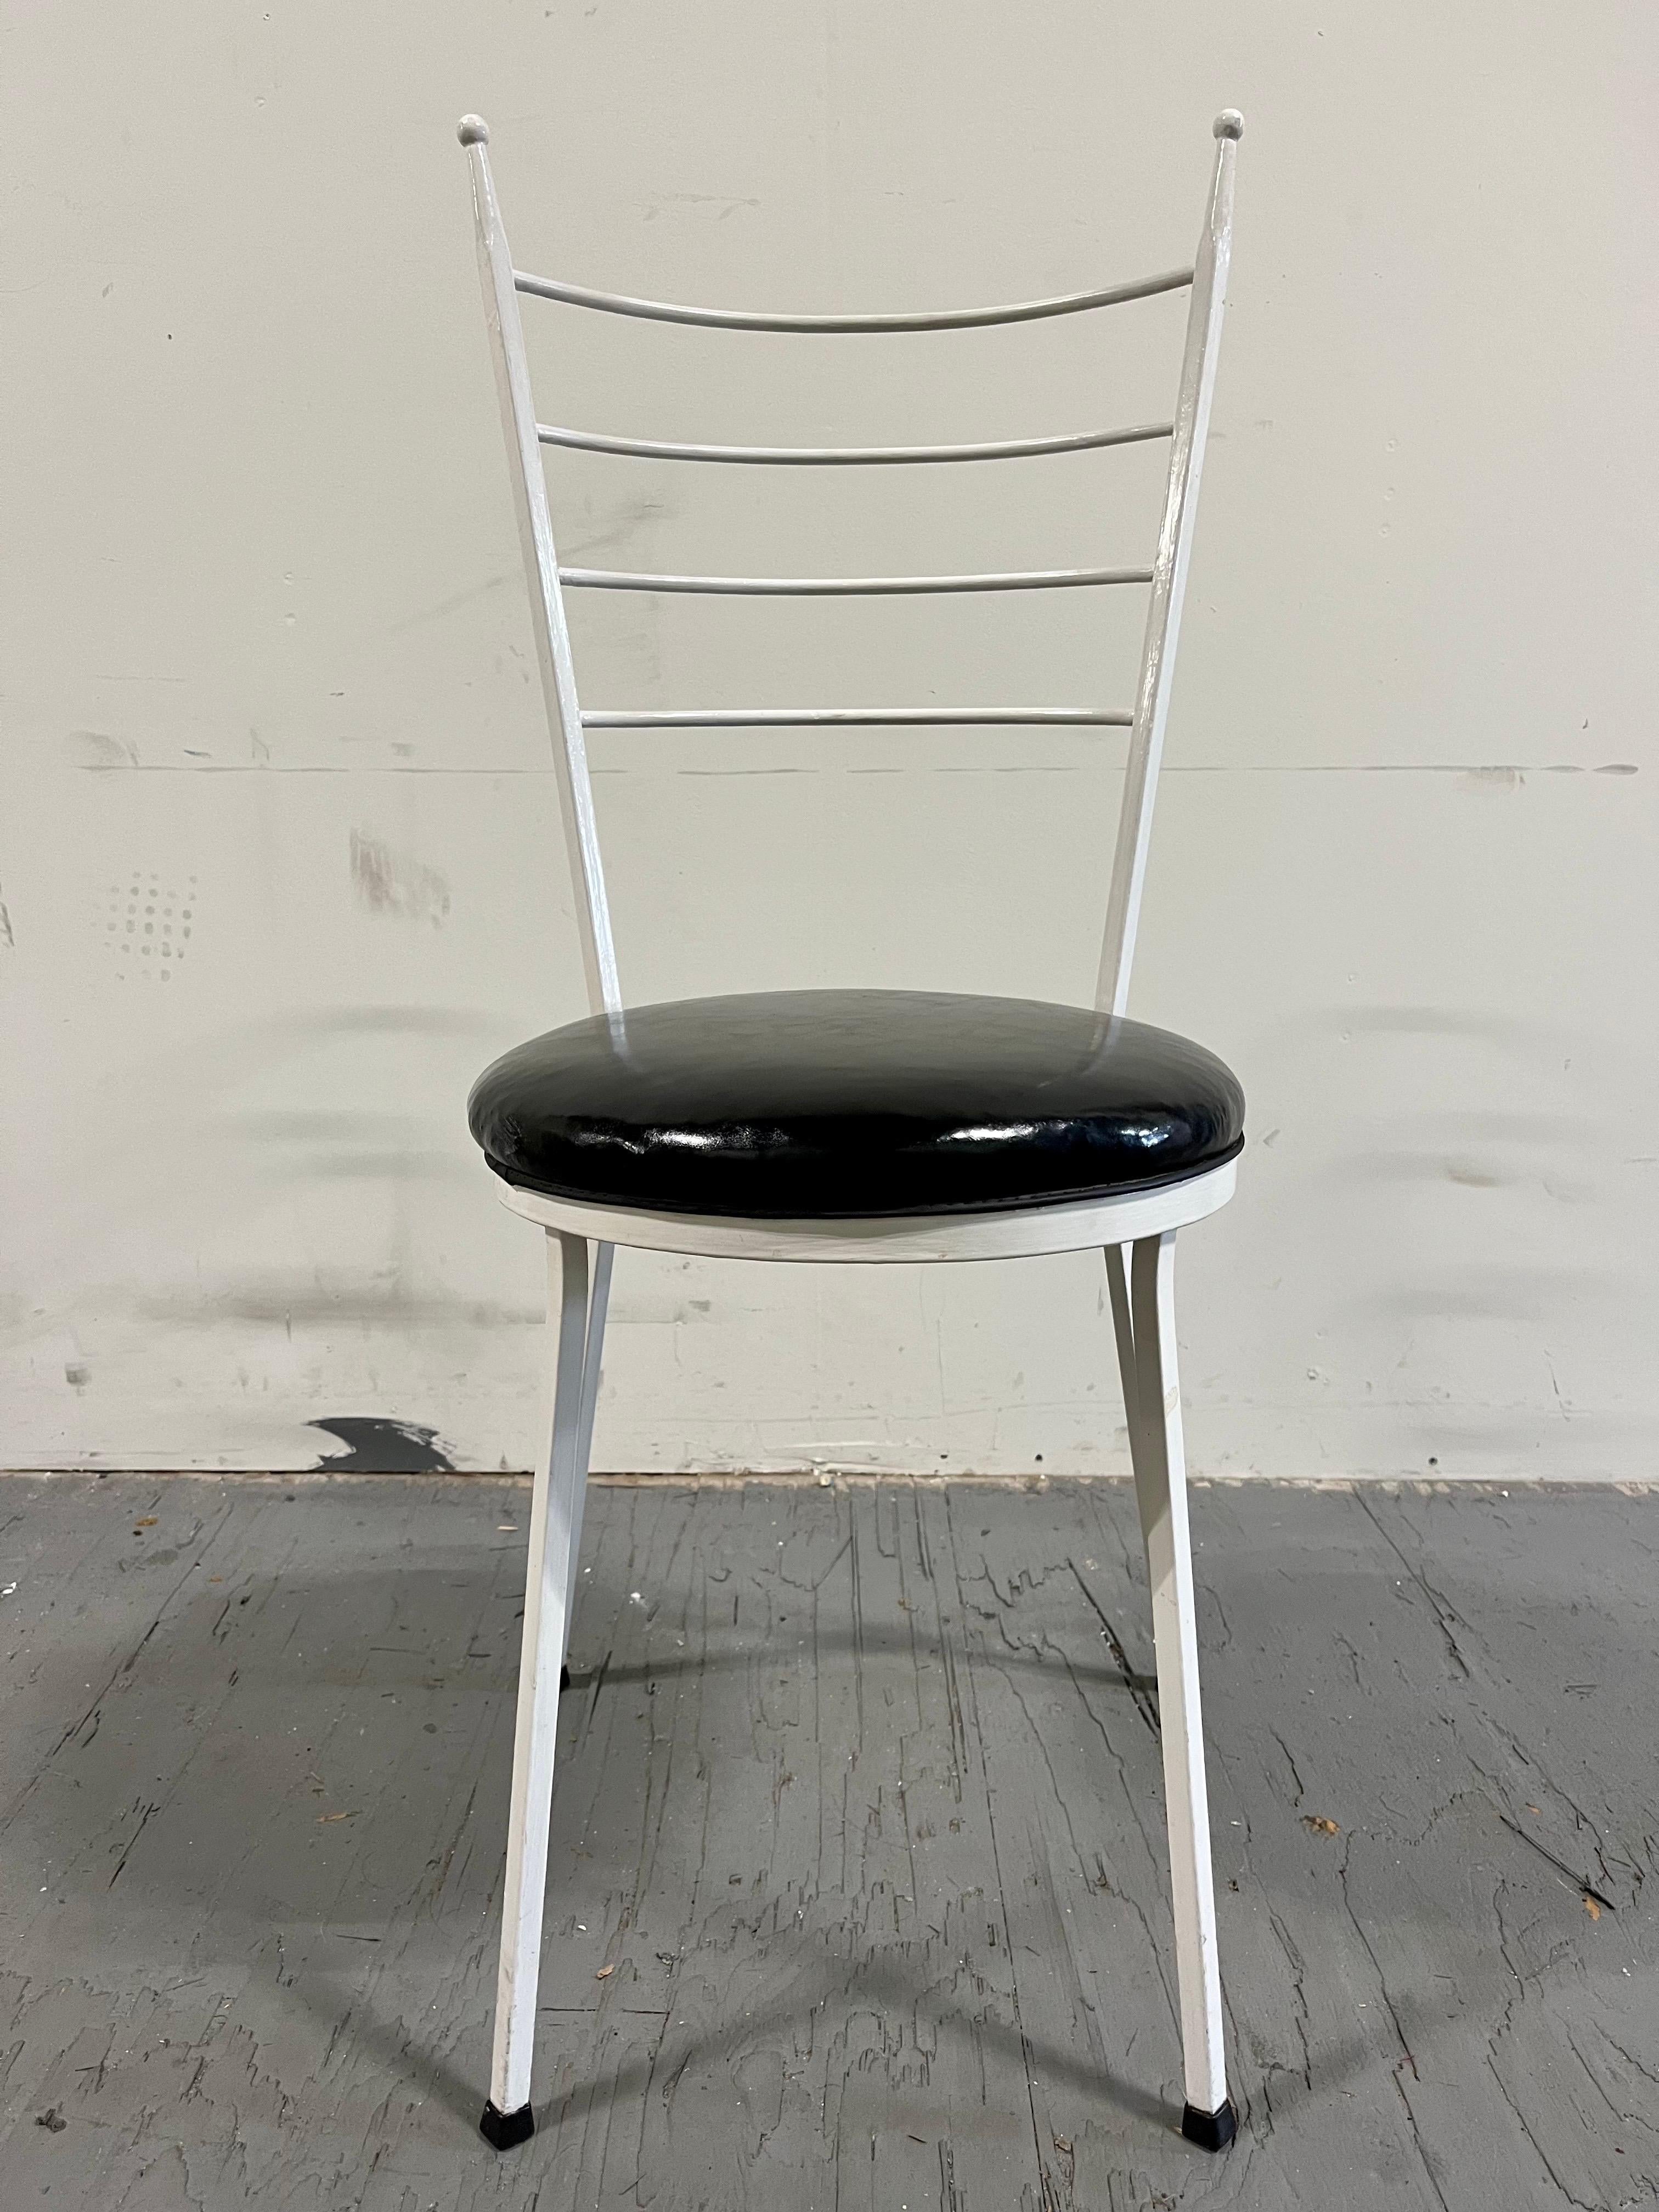 Sleek modern wrought iron chairs in the style of Paul McCobb.  Great period look with high slender ladder backs and ball finials. Striking contrast with black patten leather or vinyl cushions. 
Curbside to NYC/Philly $400